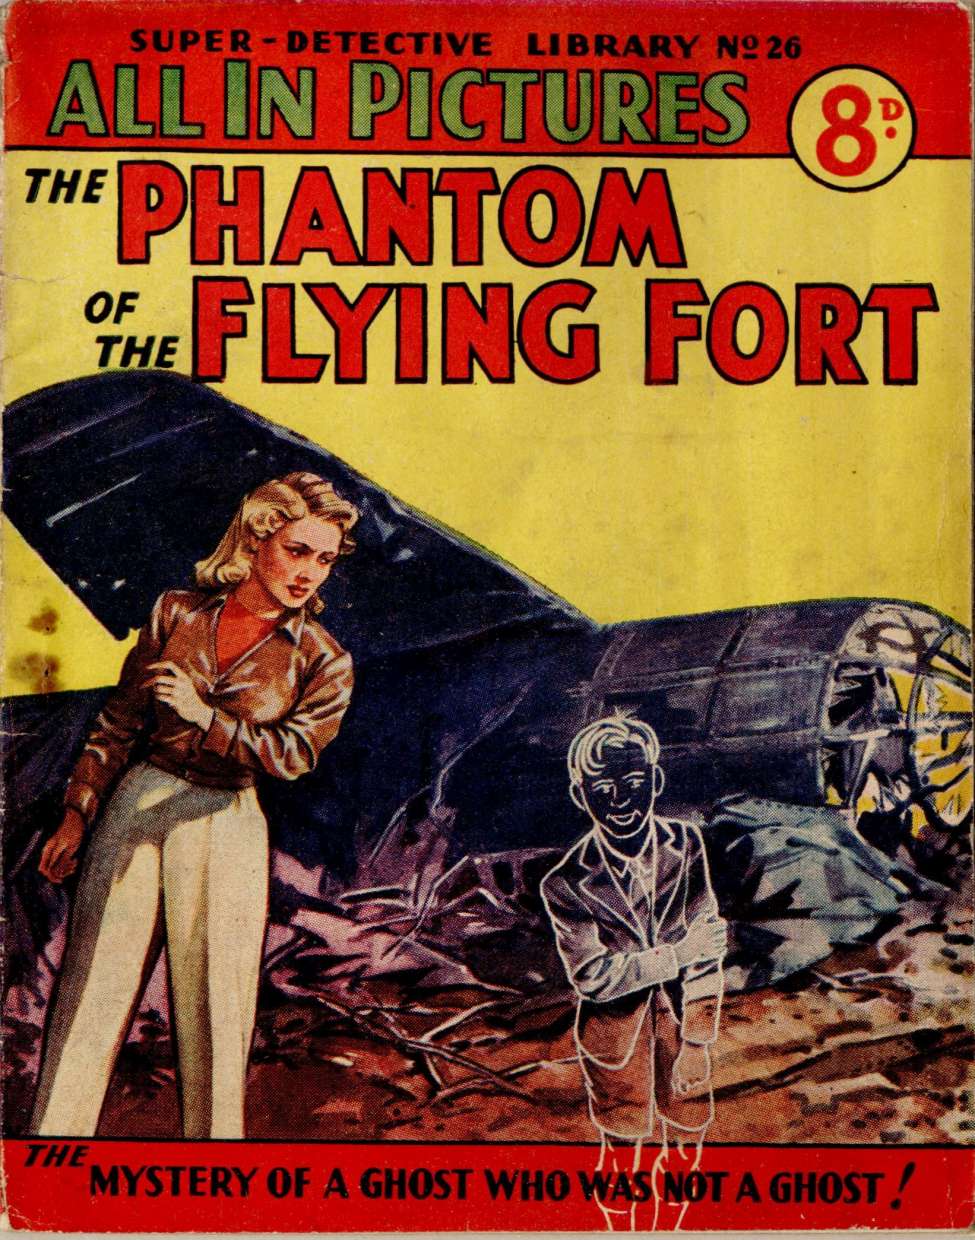 Book Cover For Super Detective Library 26 - The Phantom of the Flying Fort